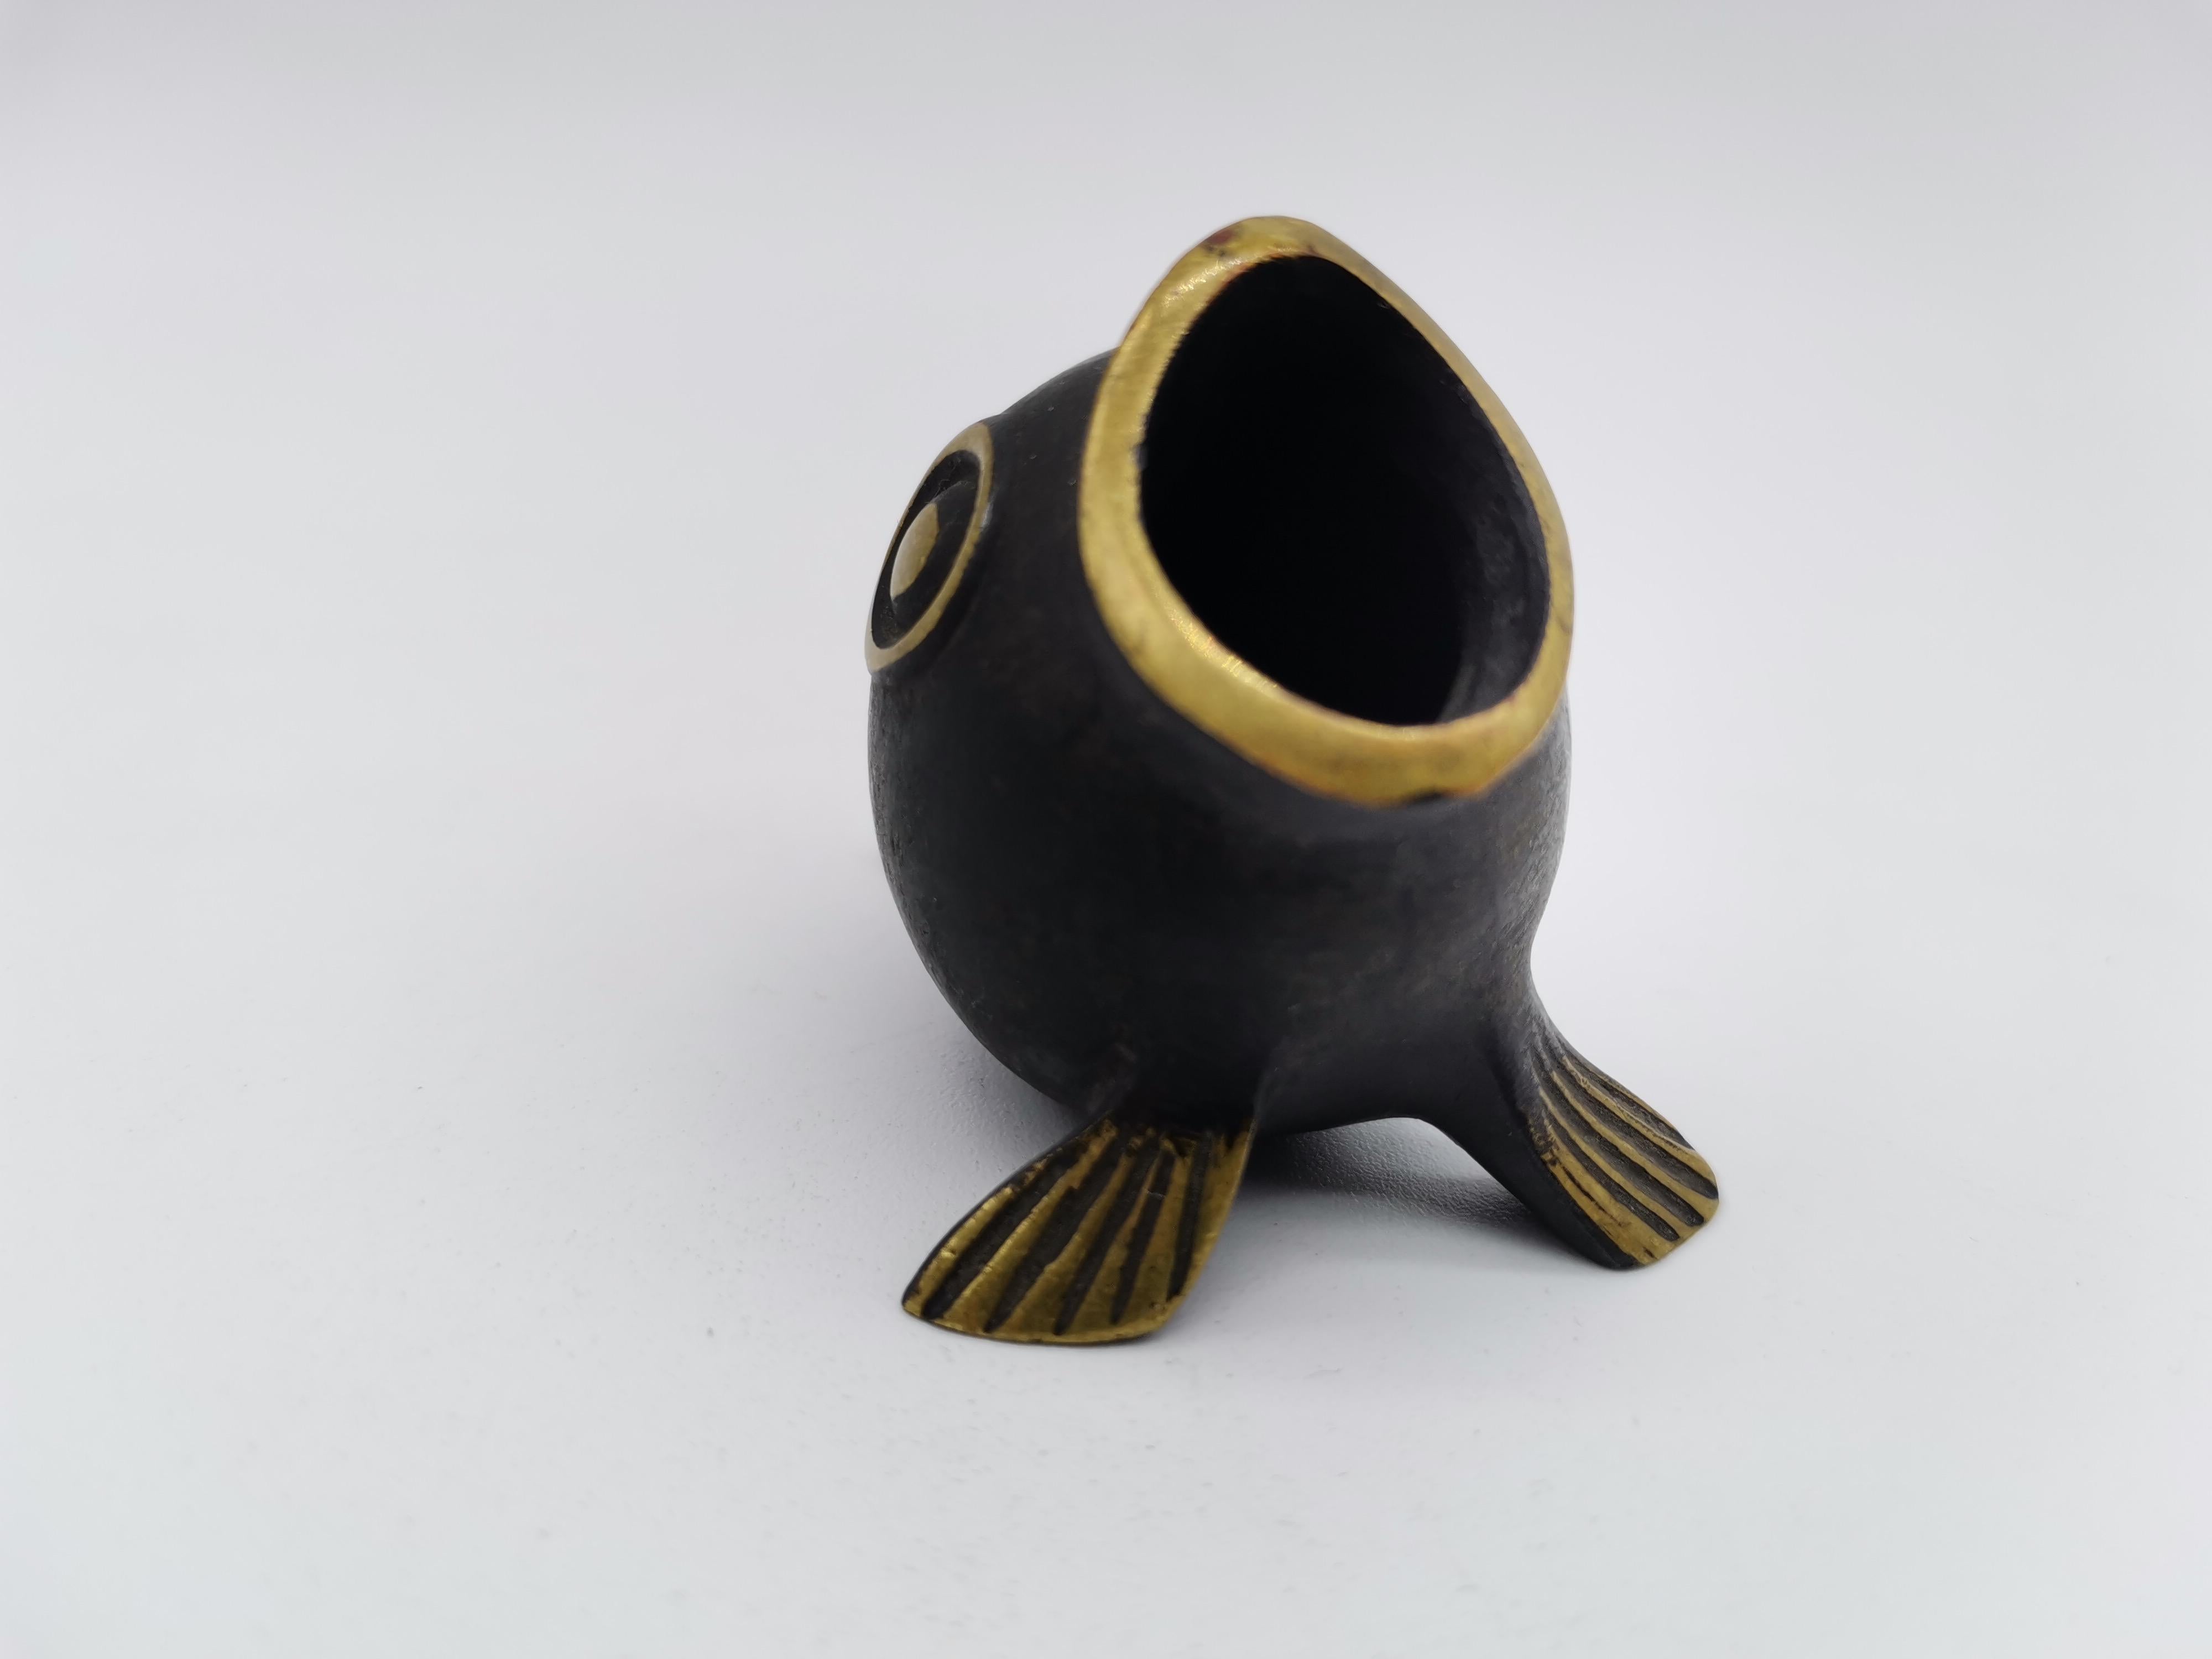 A small tooth pick holder in shape of a fish by Richard Rohac.